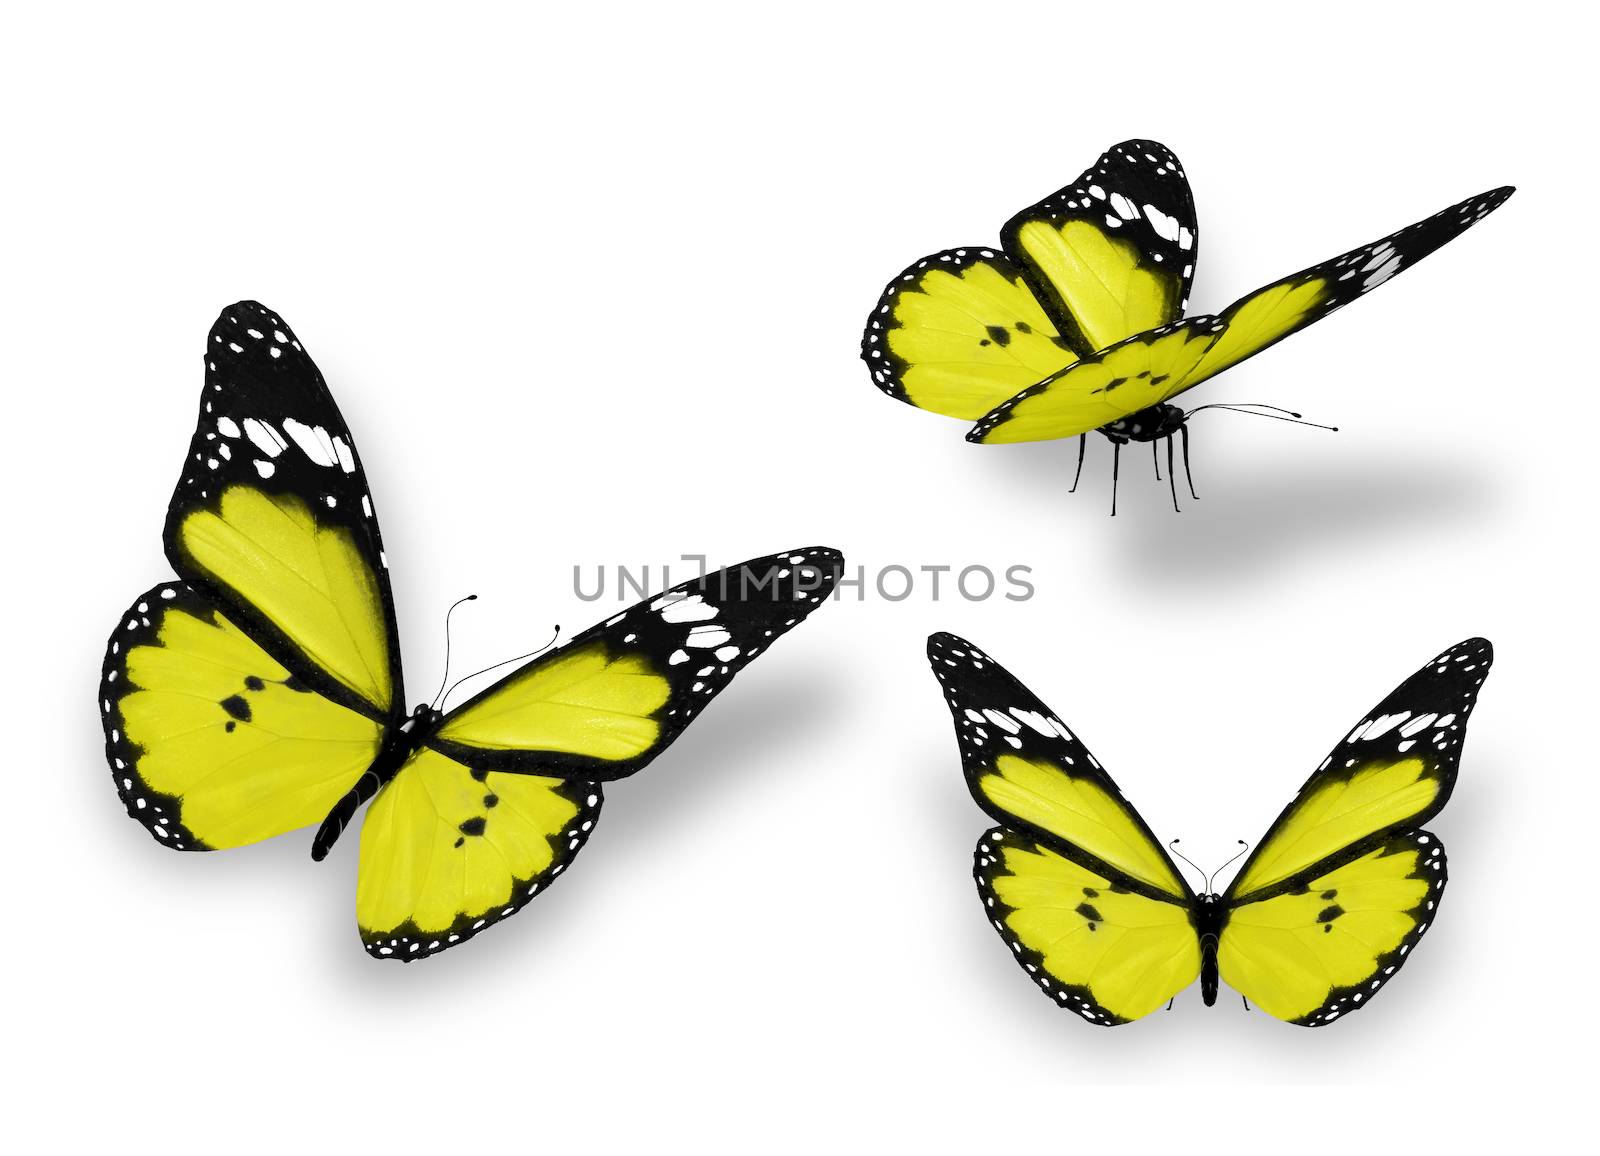 Three yellow butterflies, isolated on white by suns_28